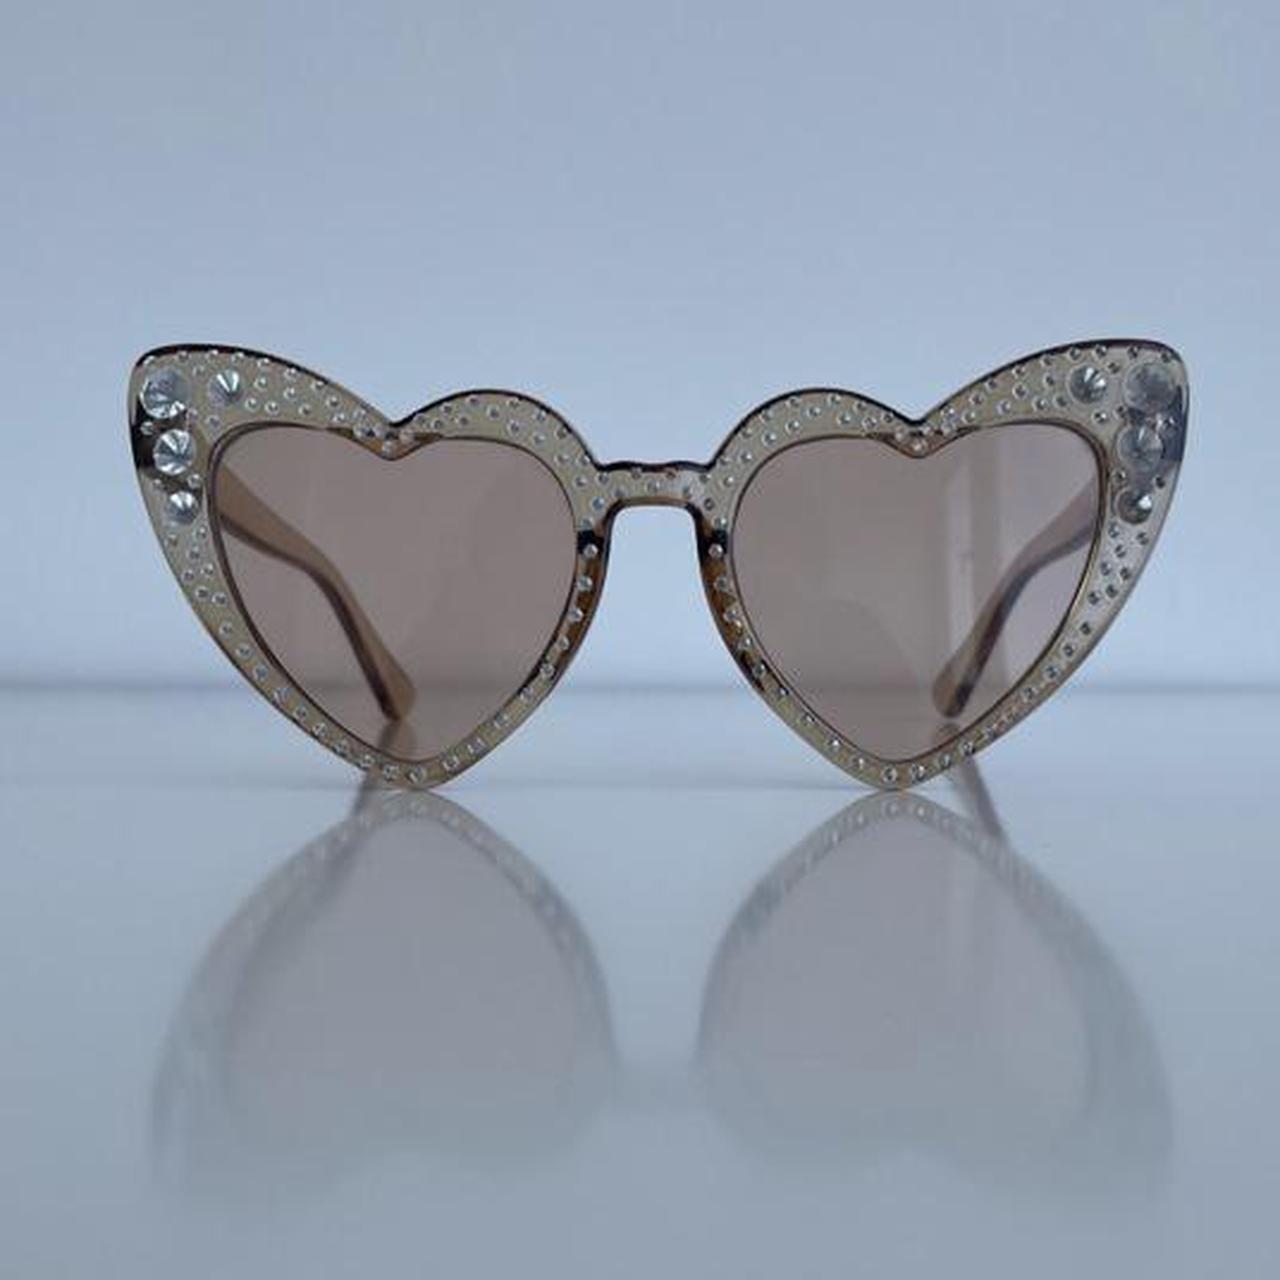 Product Image 1 - Stunning heart sunglasses In a